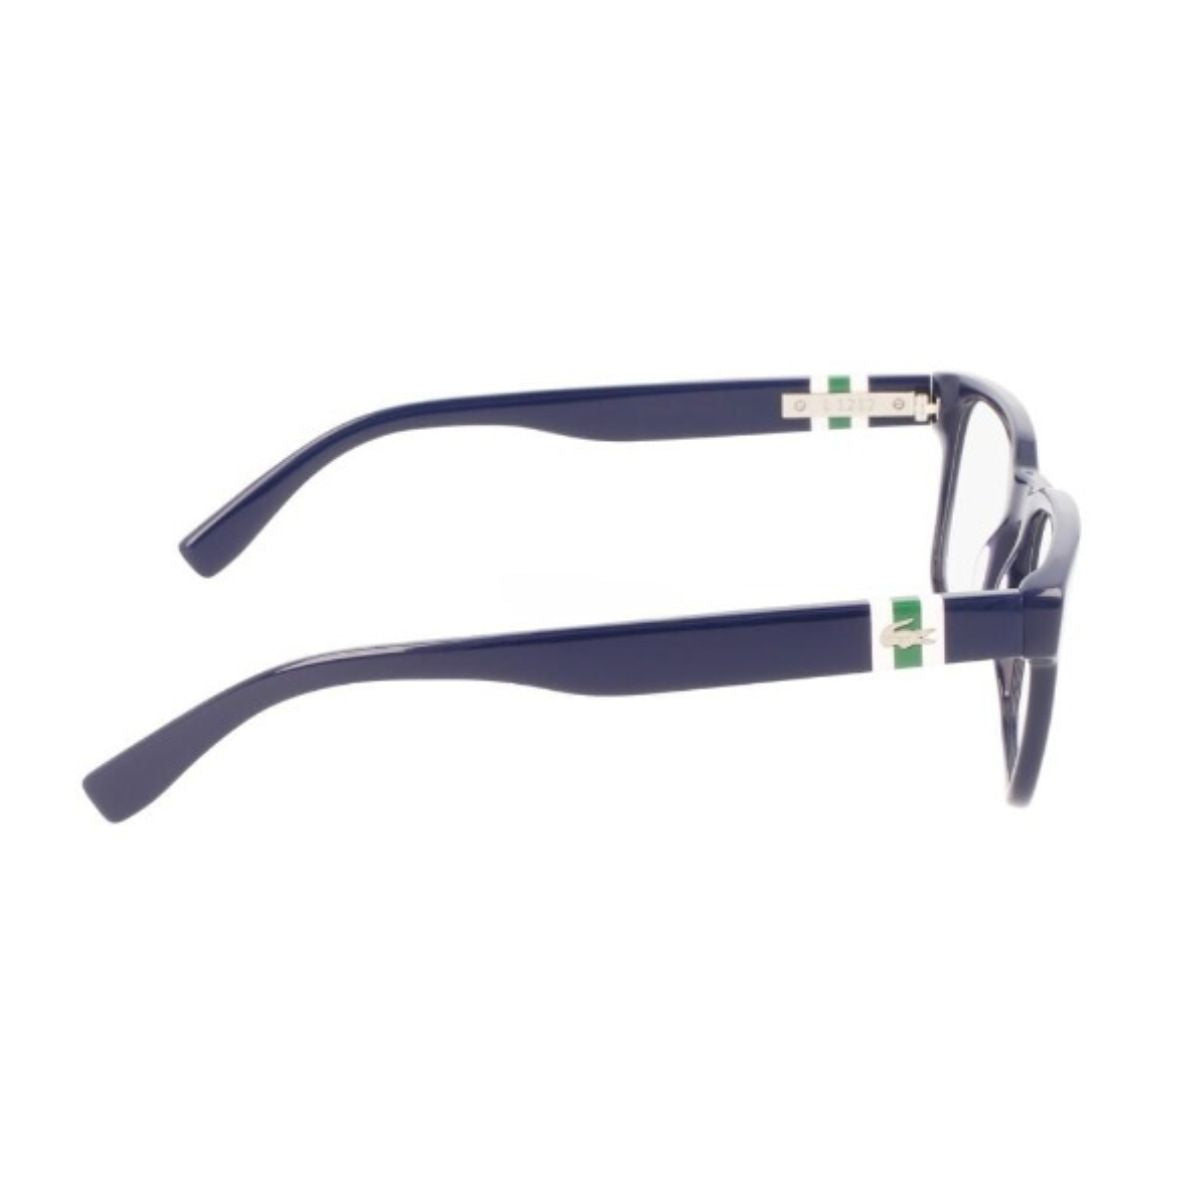 "shop Lacoste 2905 400 spectacle eyeglasses frame for men and women at optorium"